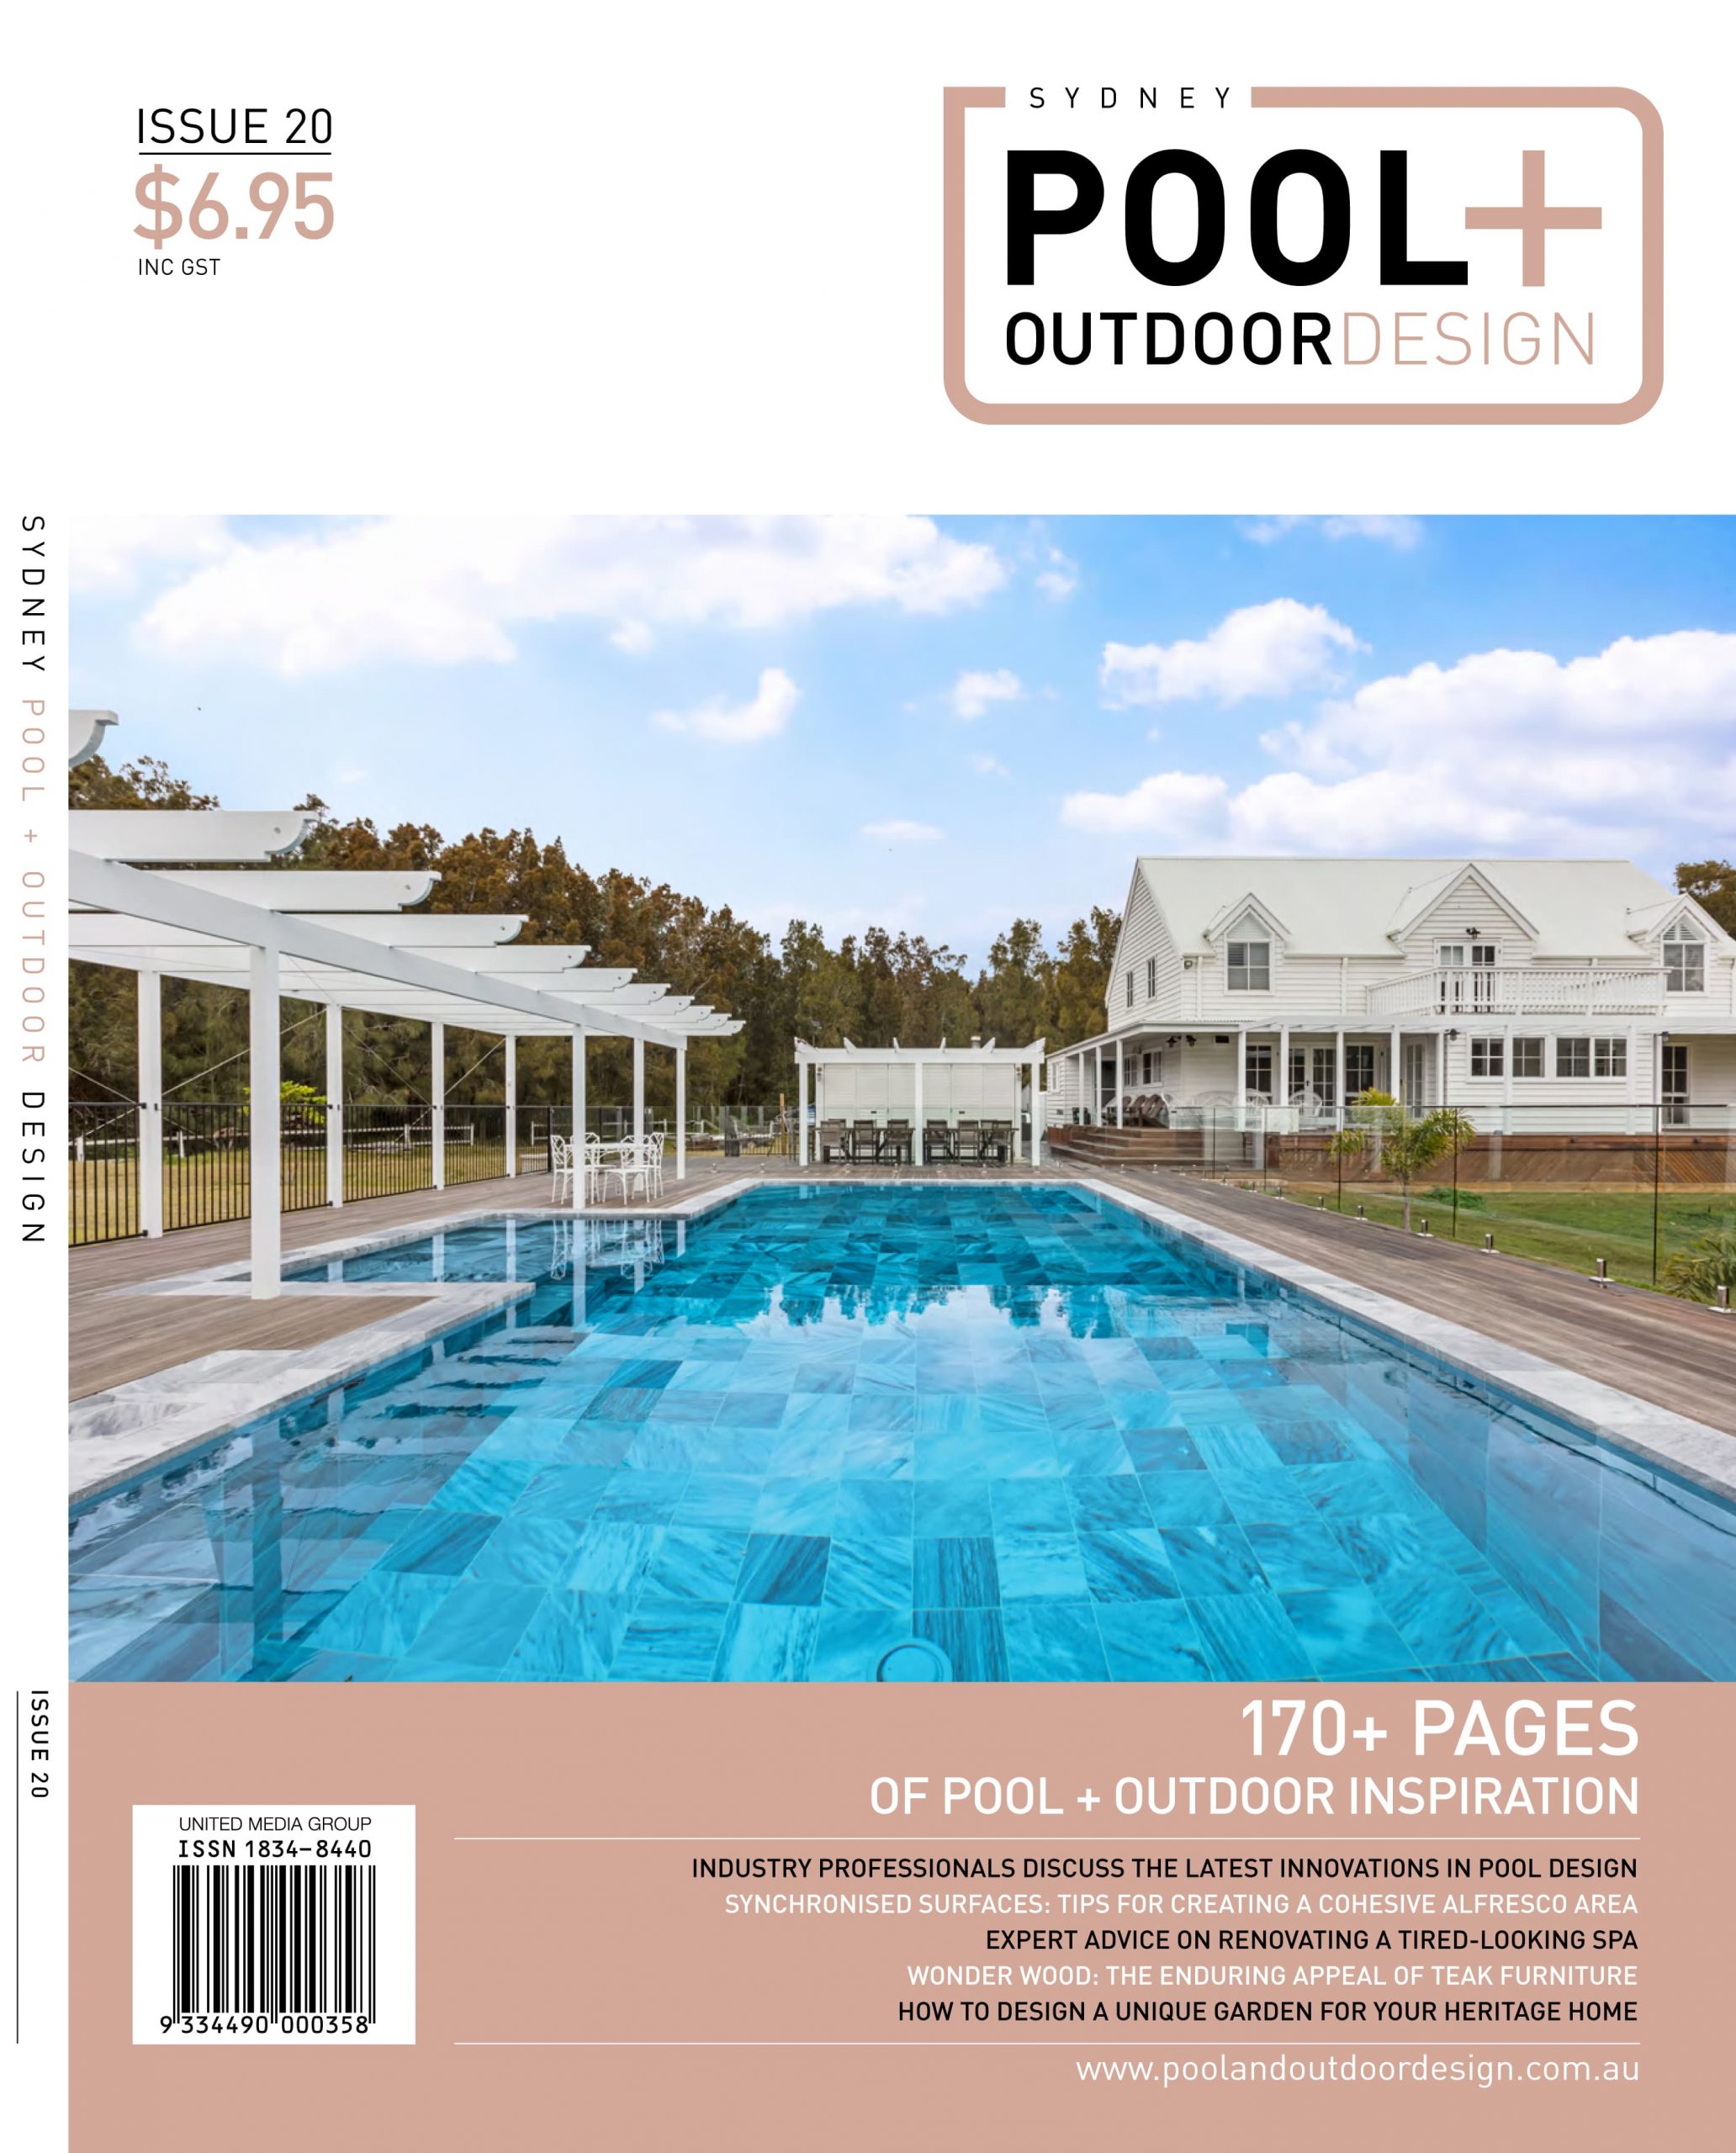 Pool + Outdoor Design Issue 20